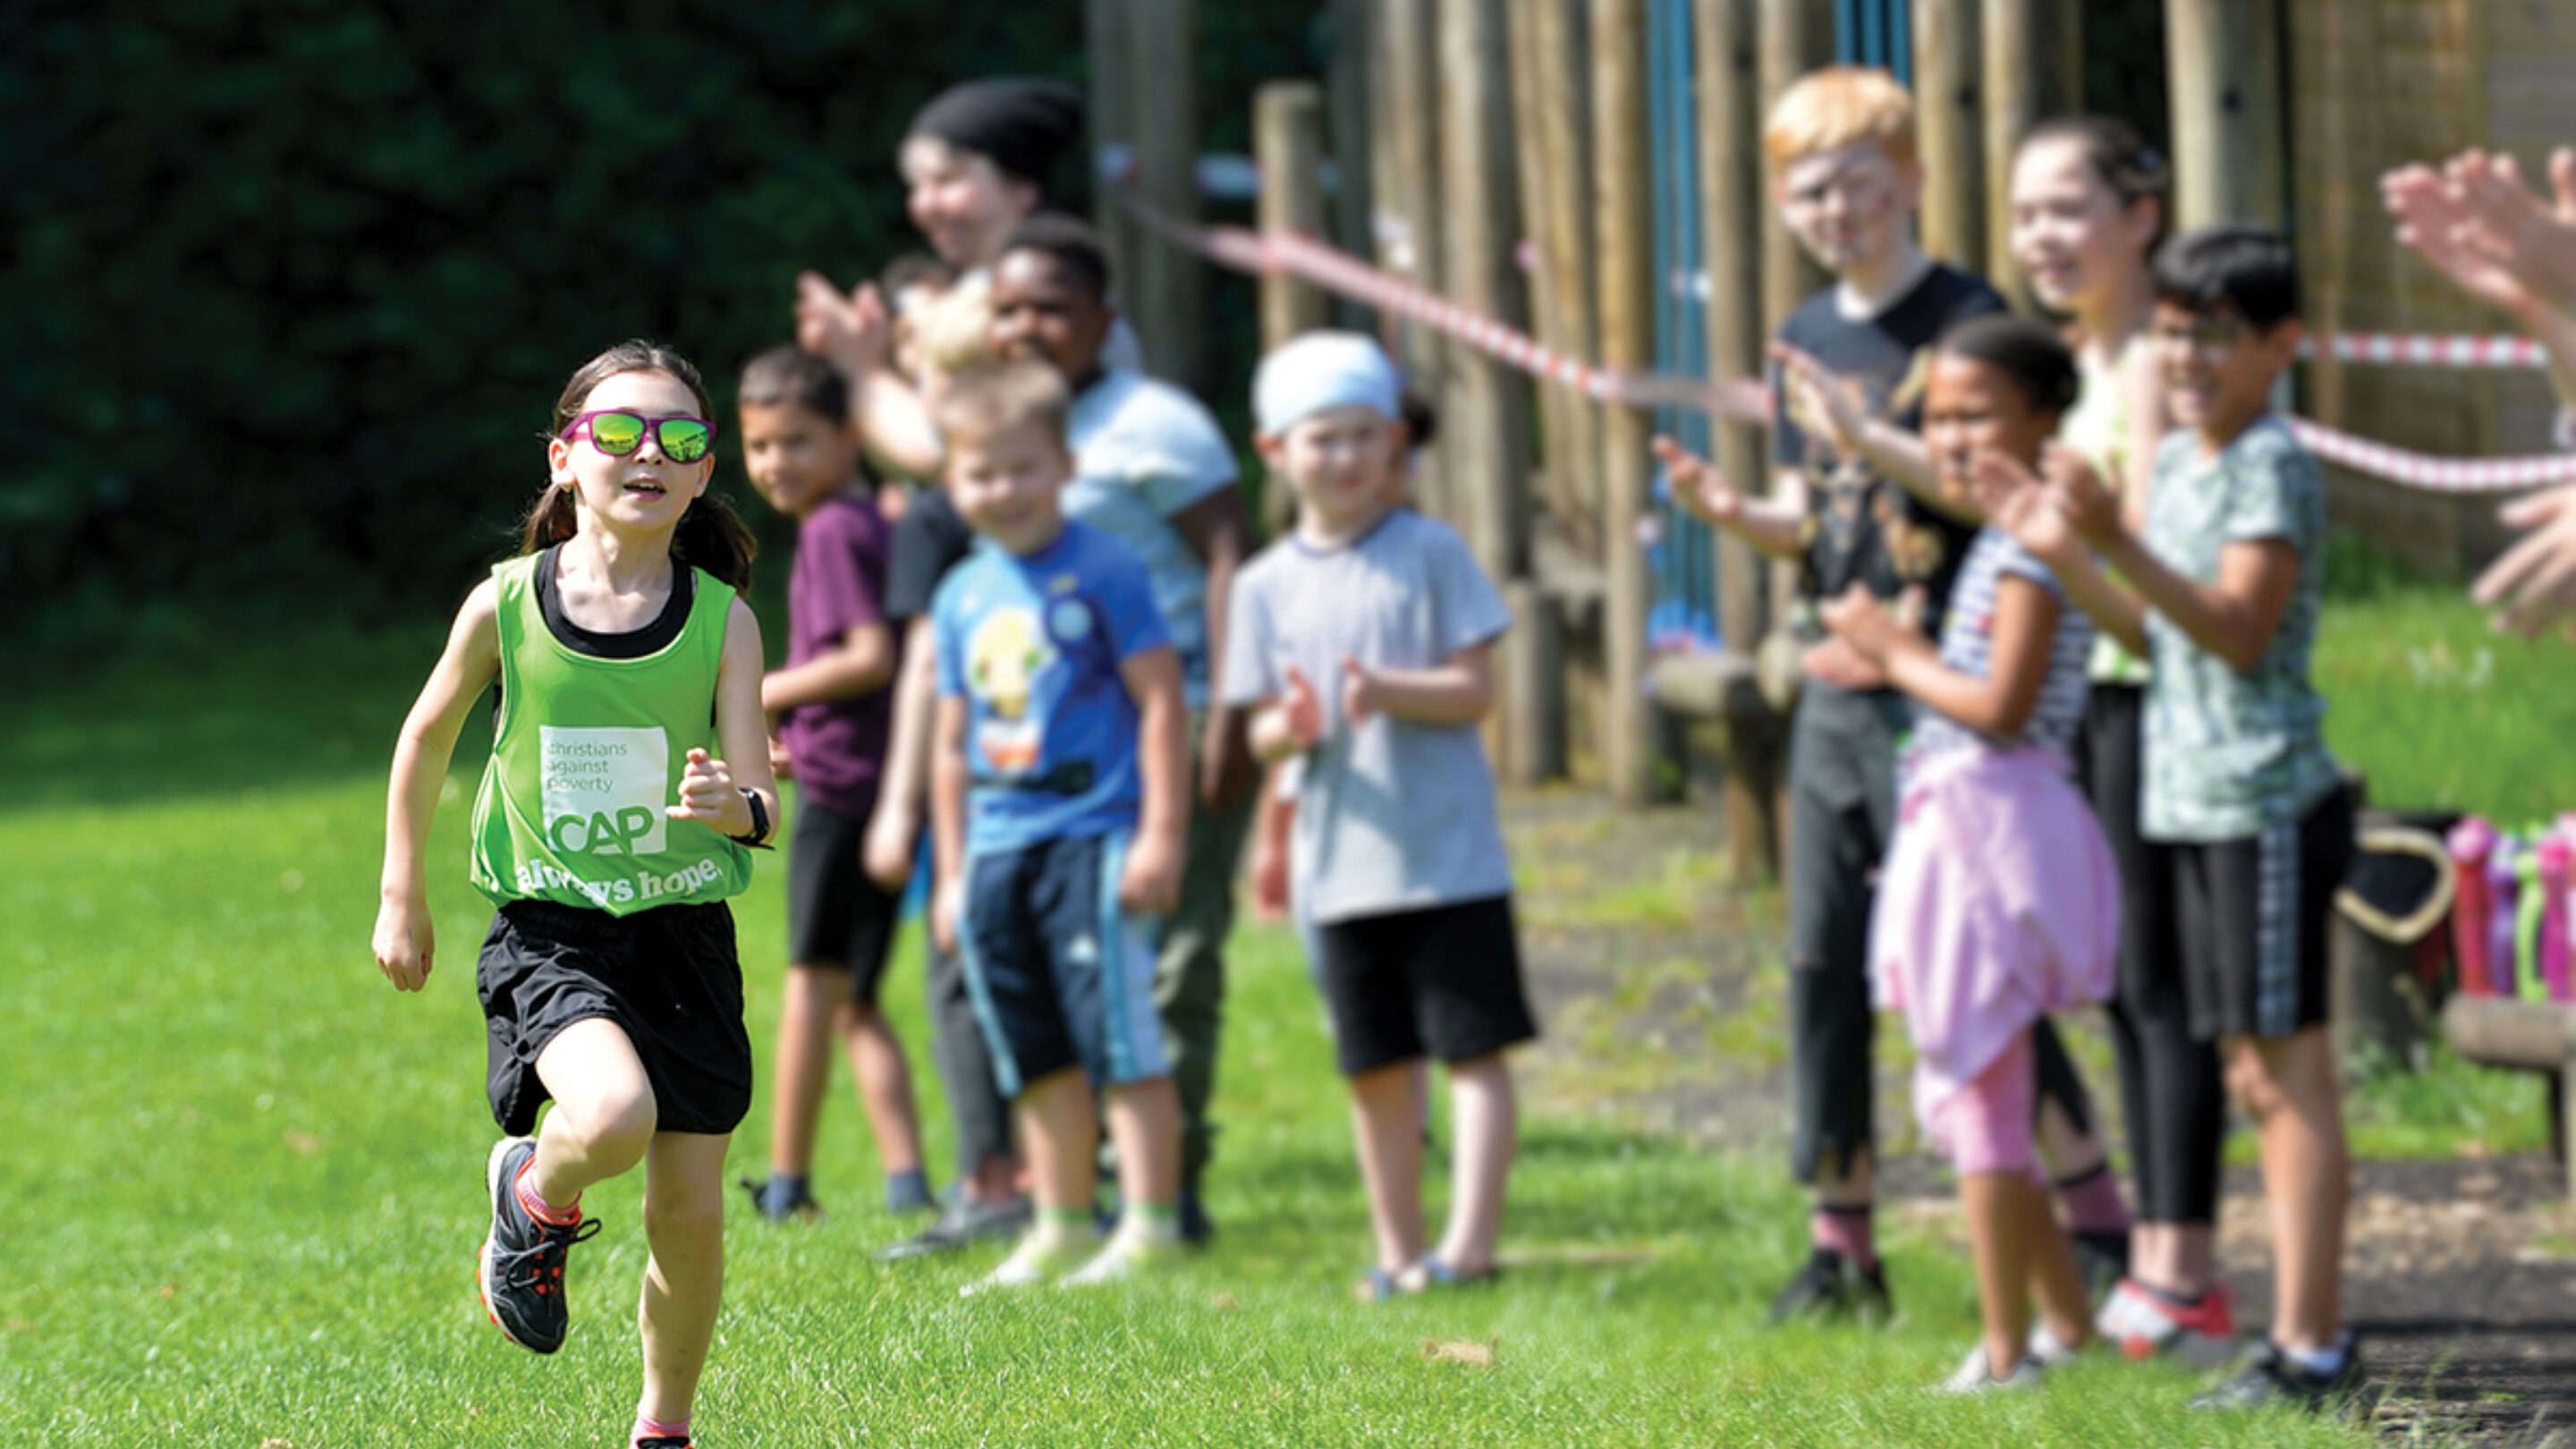 Young girl running in a bright green top as young girls and boys cheer her on.